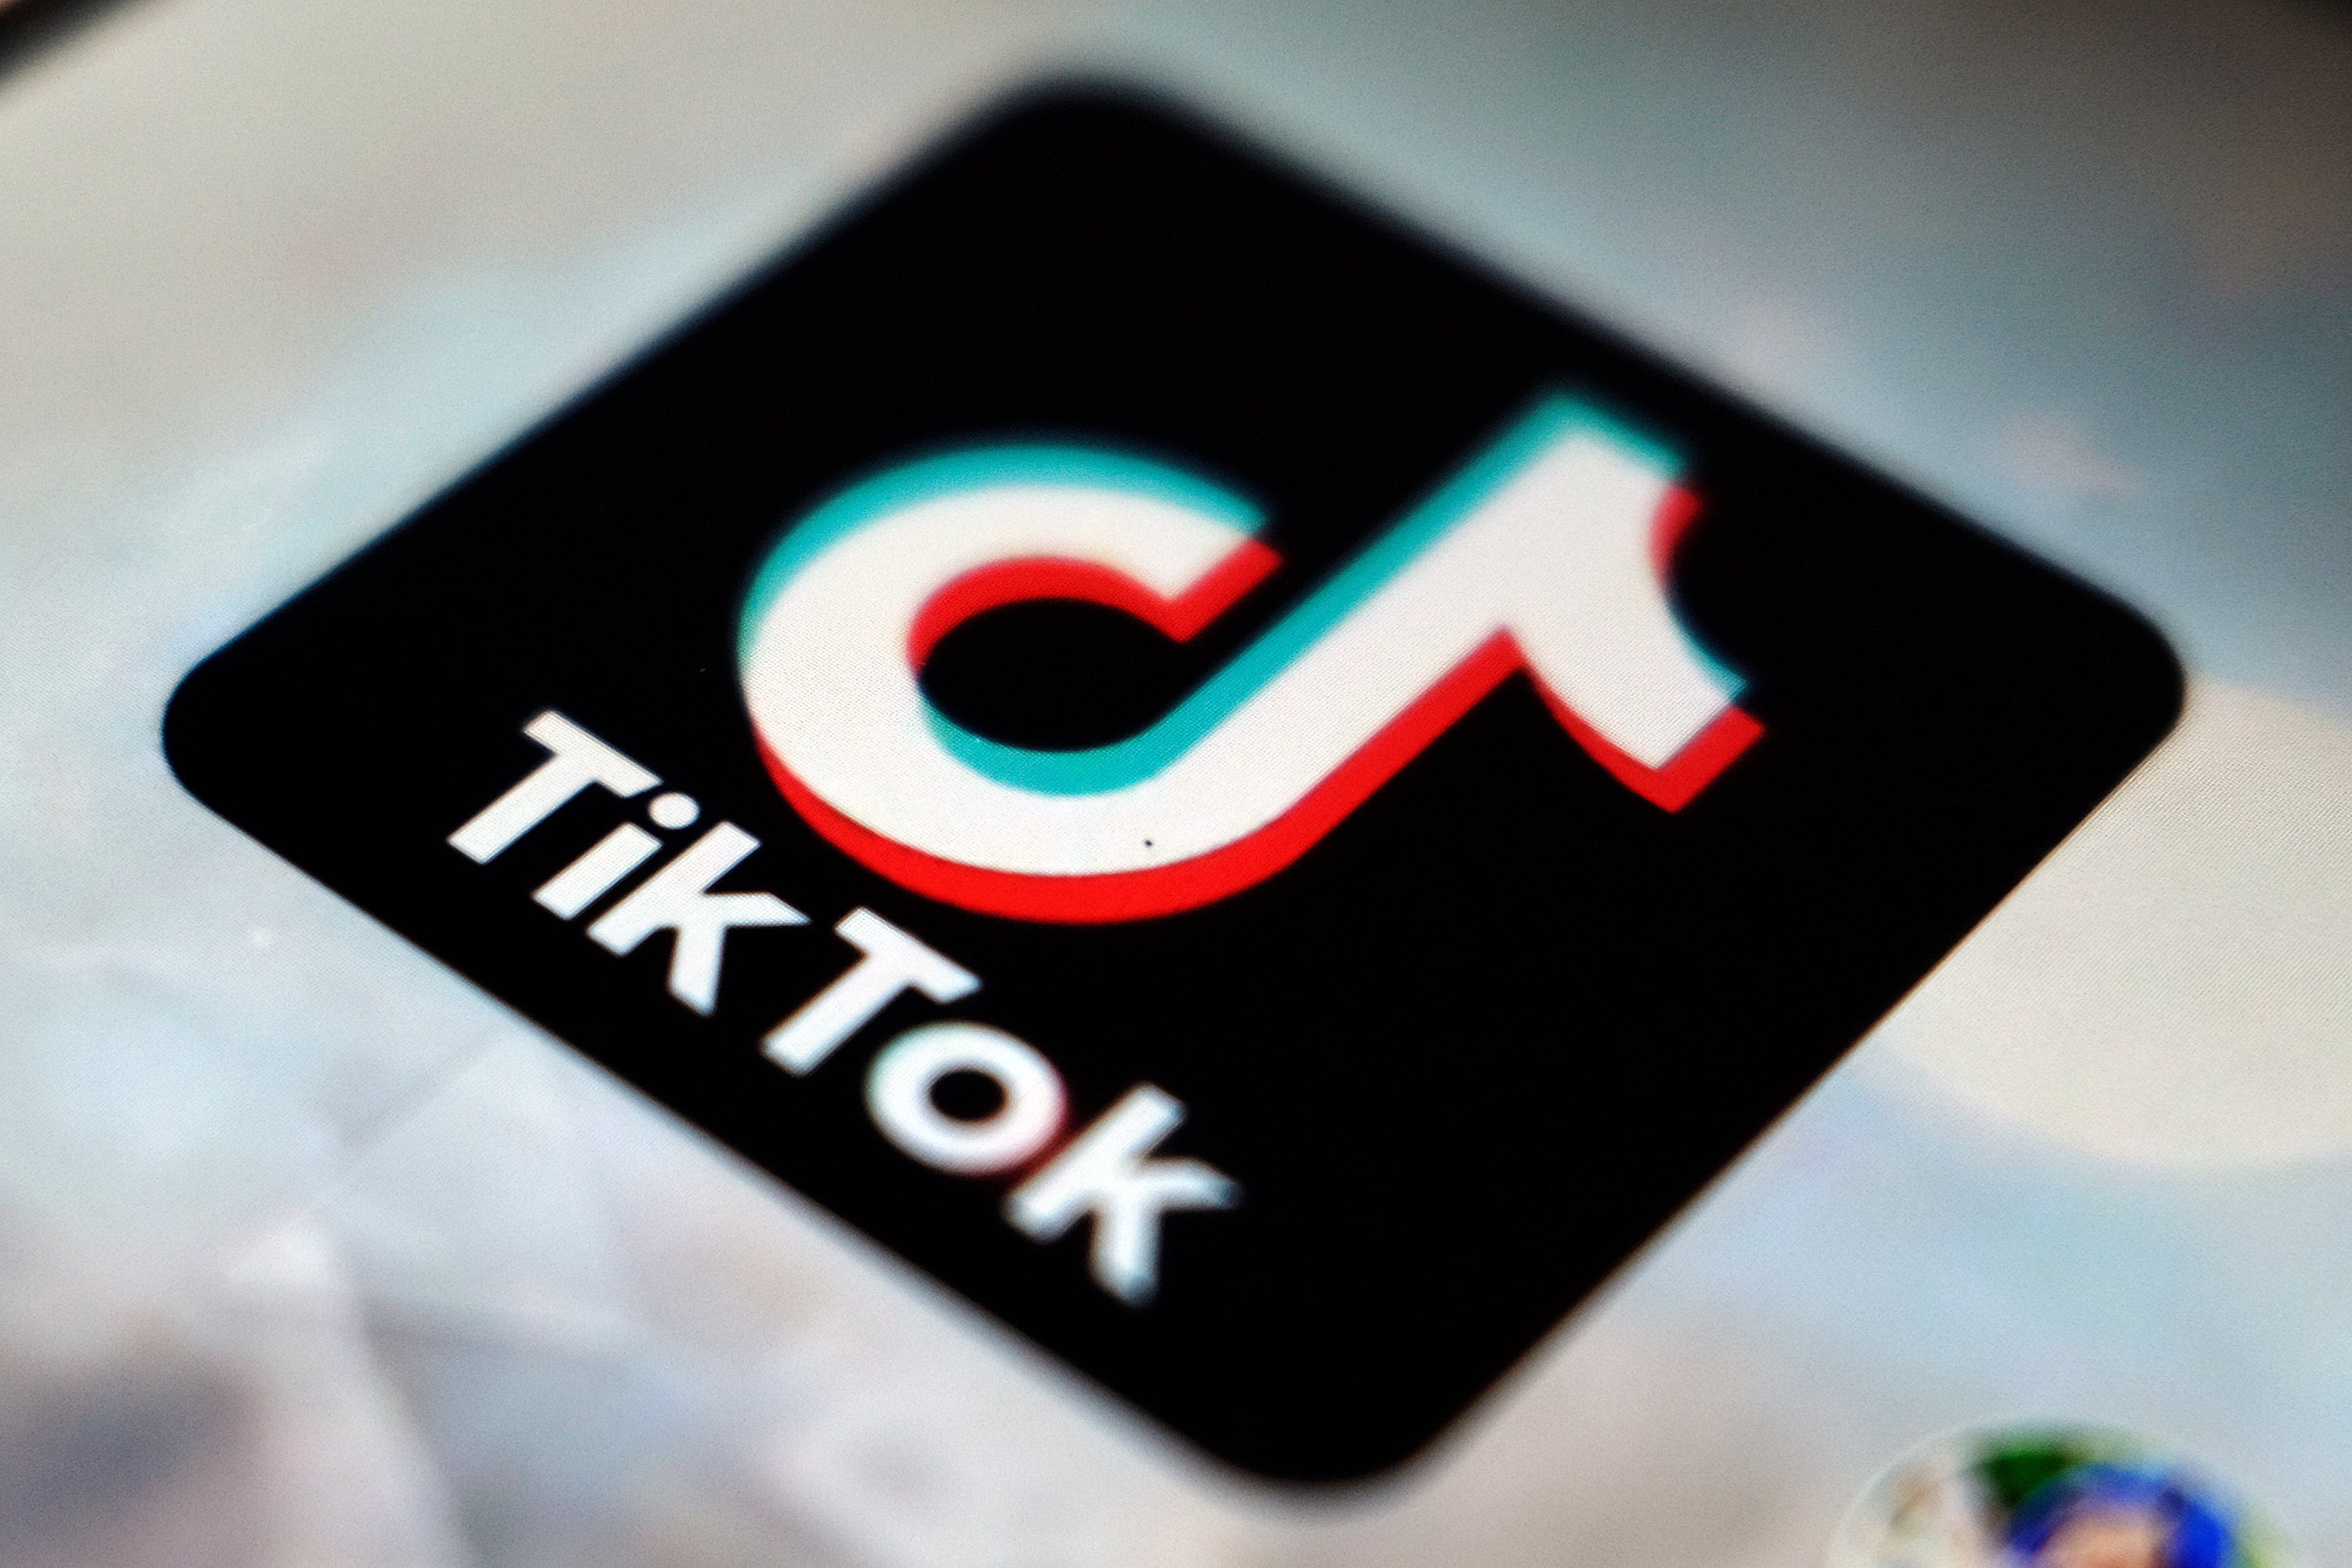 A federal judge in Montana has blocked a bid to ban TikToK in the state